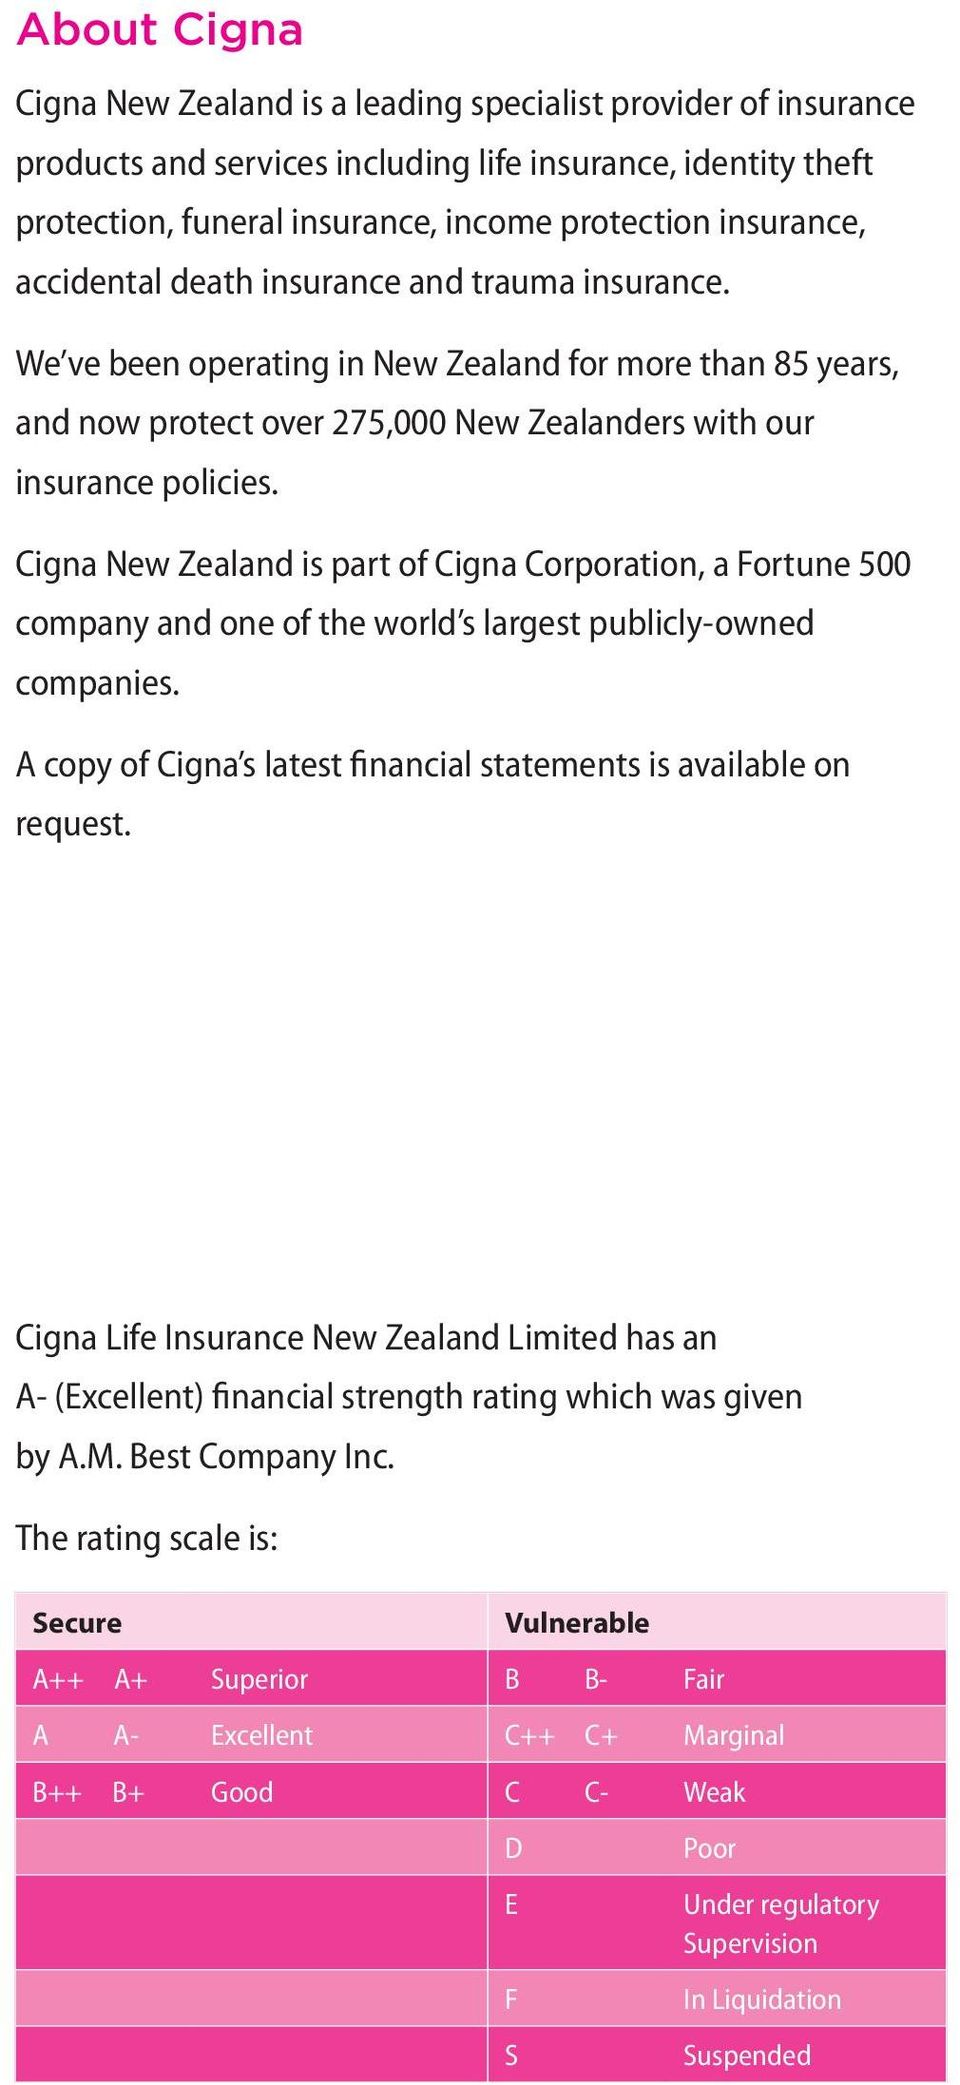 Cigna New Zealand is part of Cigna Corporation, a Fortune 500 company and one of the world s largest publicly-owned companies. A copy of Cigna s latest financial statements is available on request.